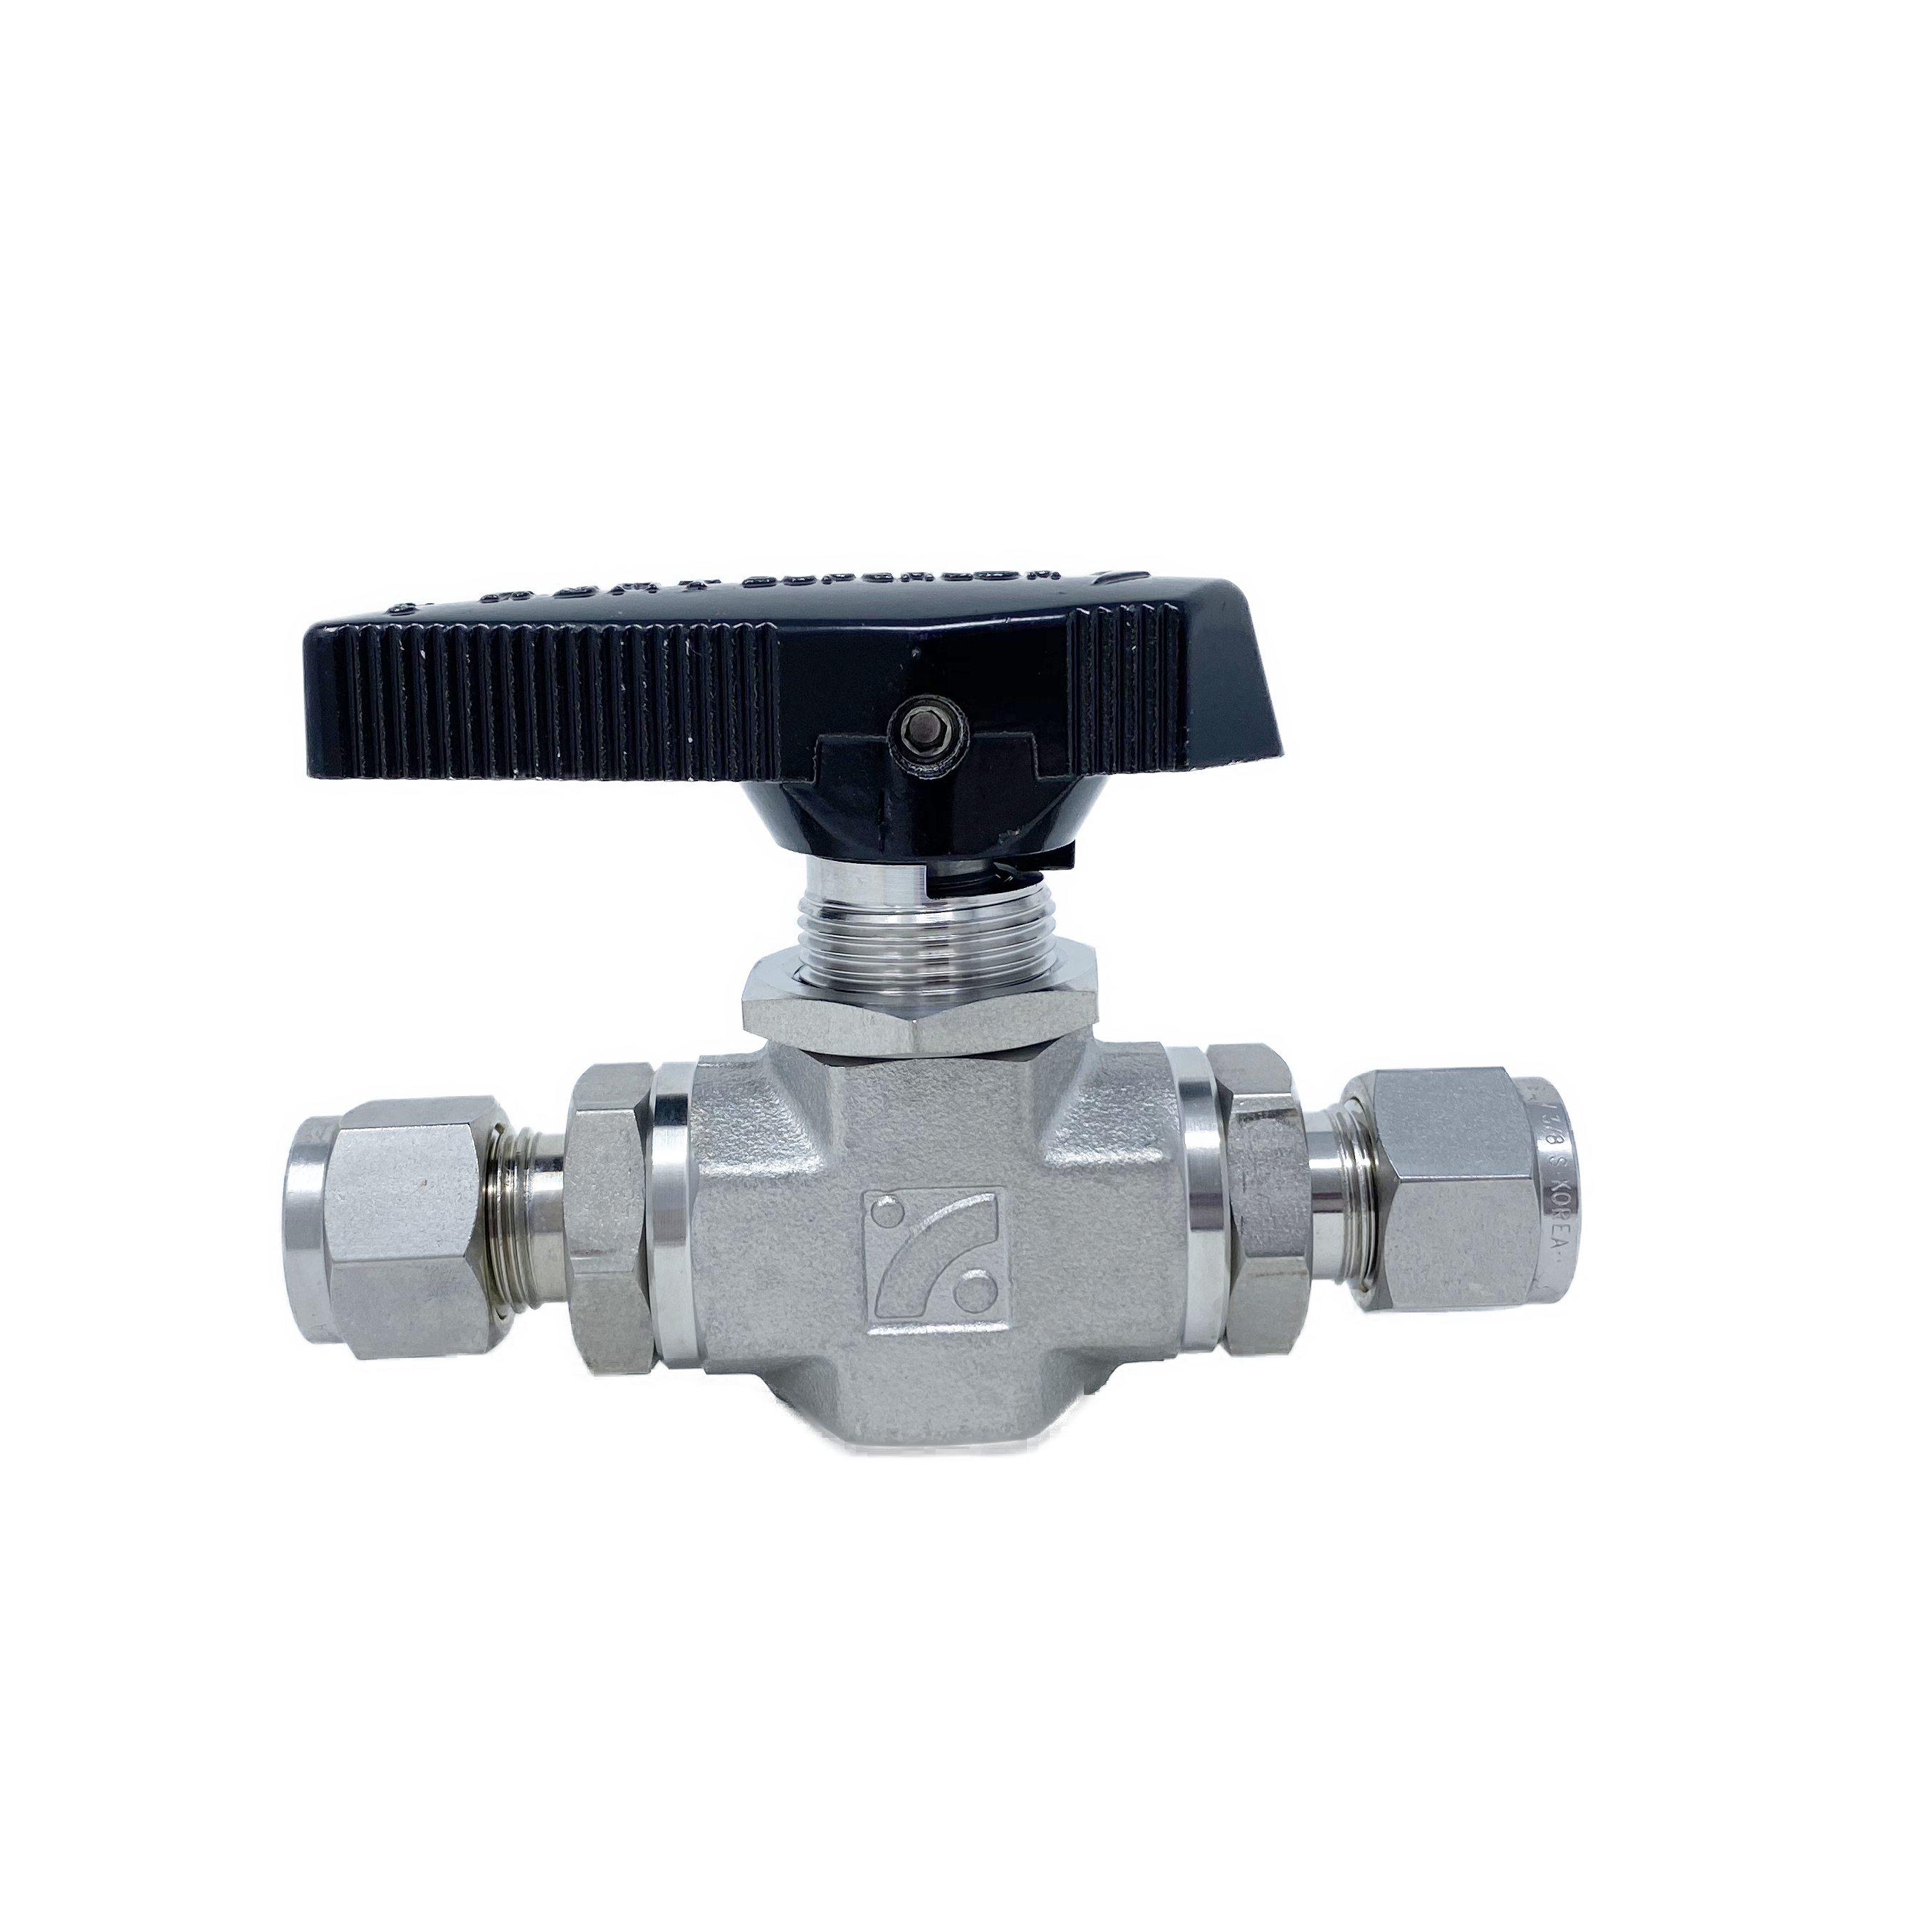 SBVF3602-S-6-CNG : Superlok Ball Valve, Forged High Pressure, 3/8" Tube O.D, CNG, 6000psi, 316SS